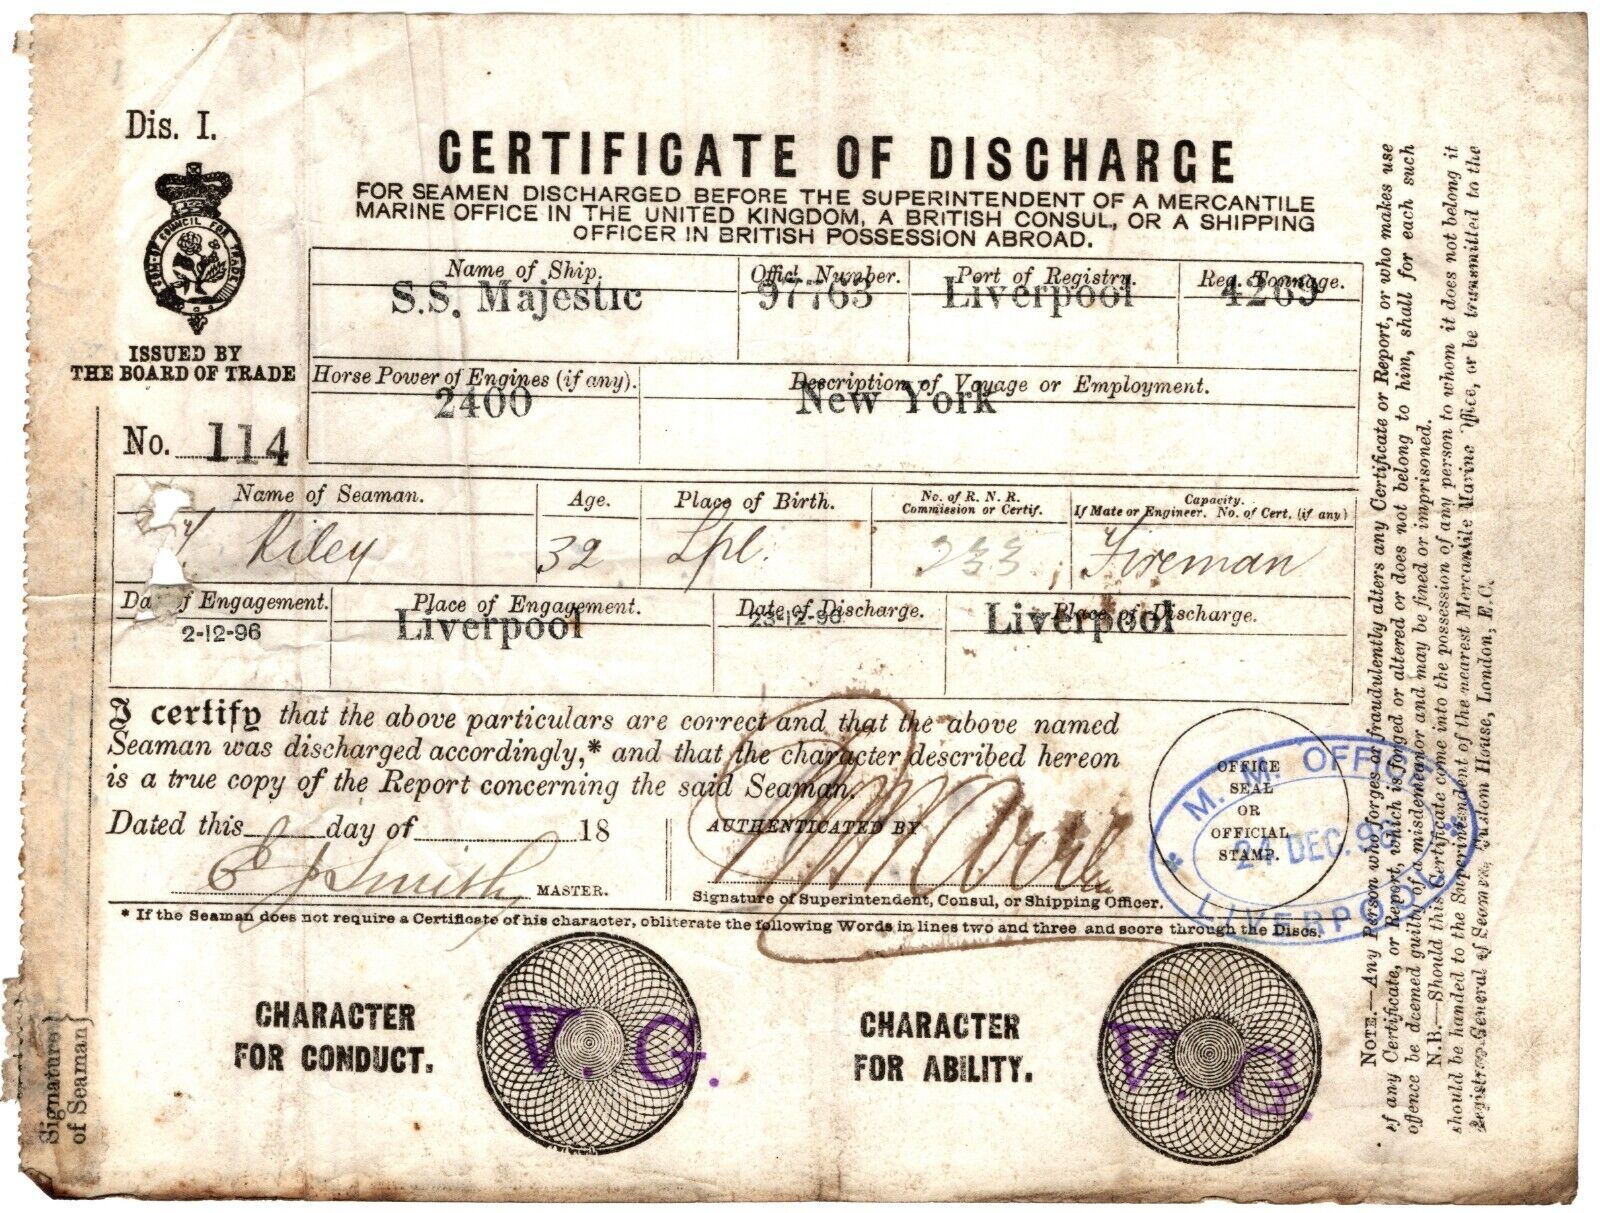 Edward J. Smith - RARE Document Signed - Titanic Captain Who Died When Ship Sank